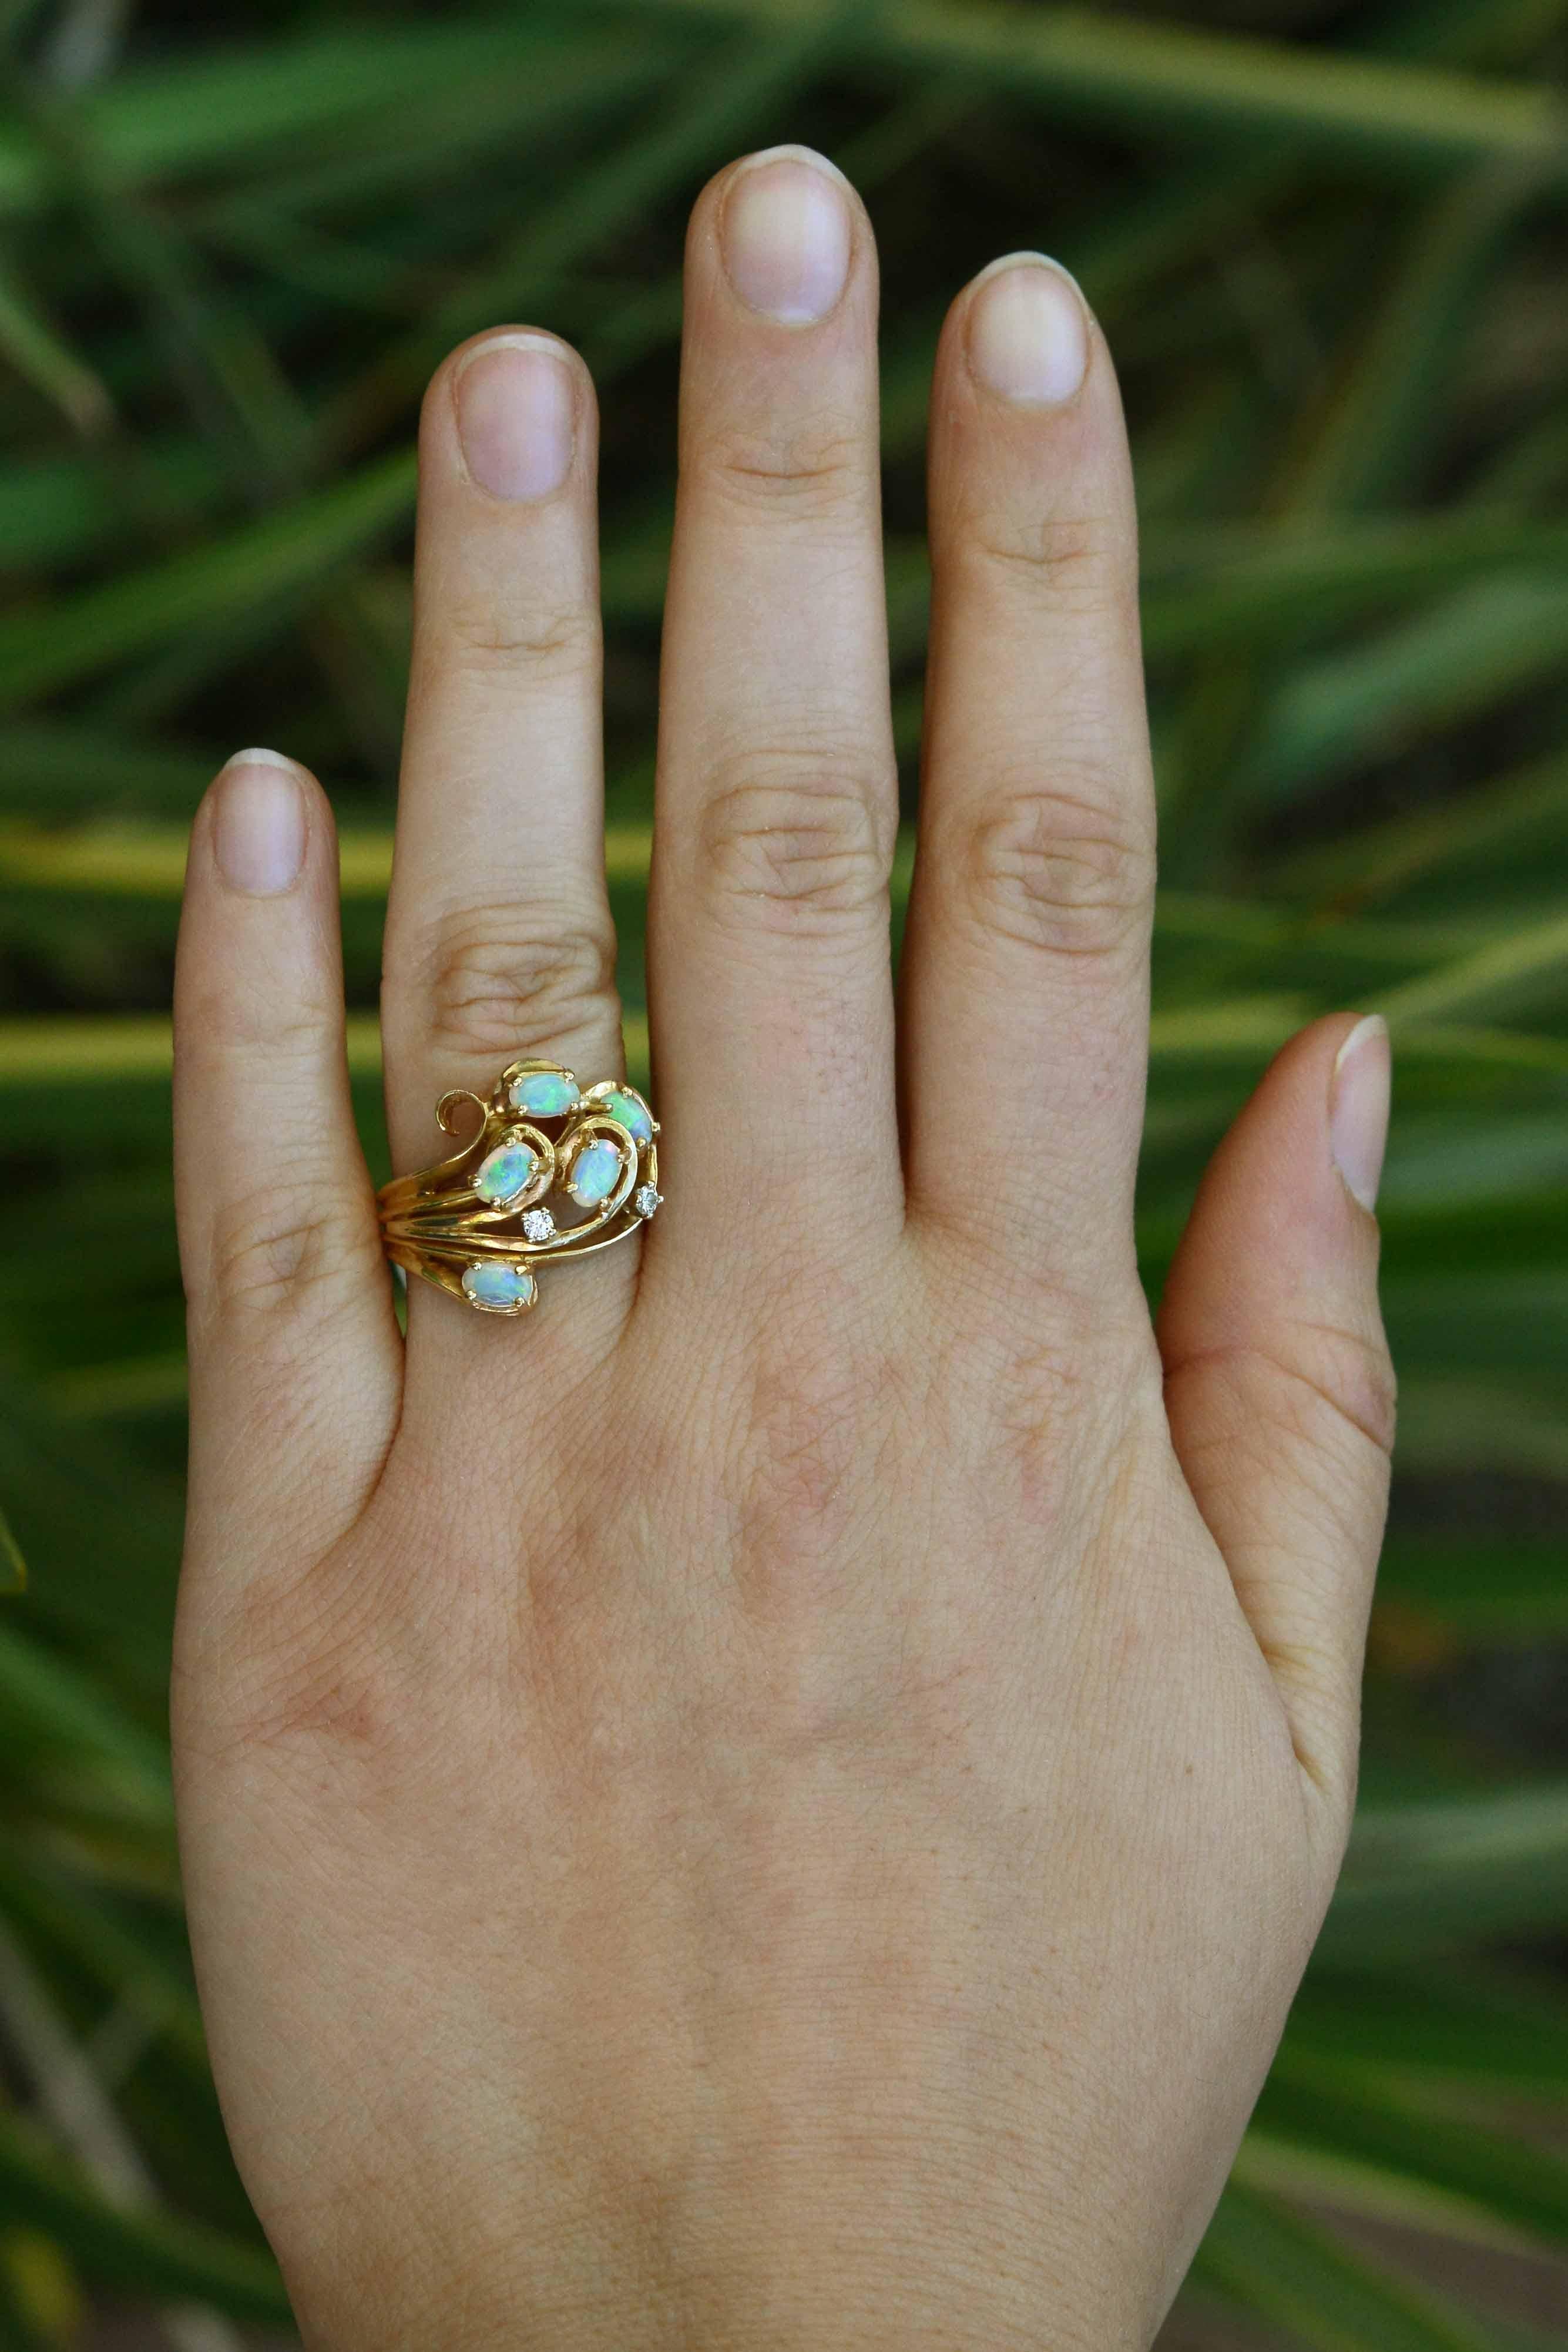 A graceful, flowing ring with swirling 14k yellow gold and blazing crystal brush-stroke opals that flash an incredible blue, green, and orange array. Studded with dainty diamonds that add a beautiful sparkle. This unique, vintage 1960s cocktail ring